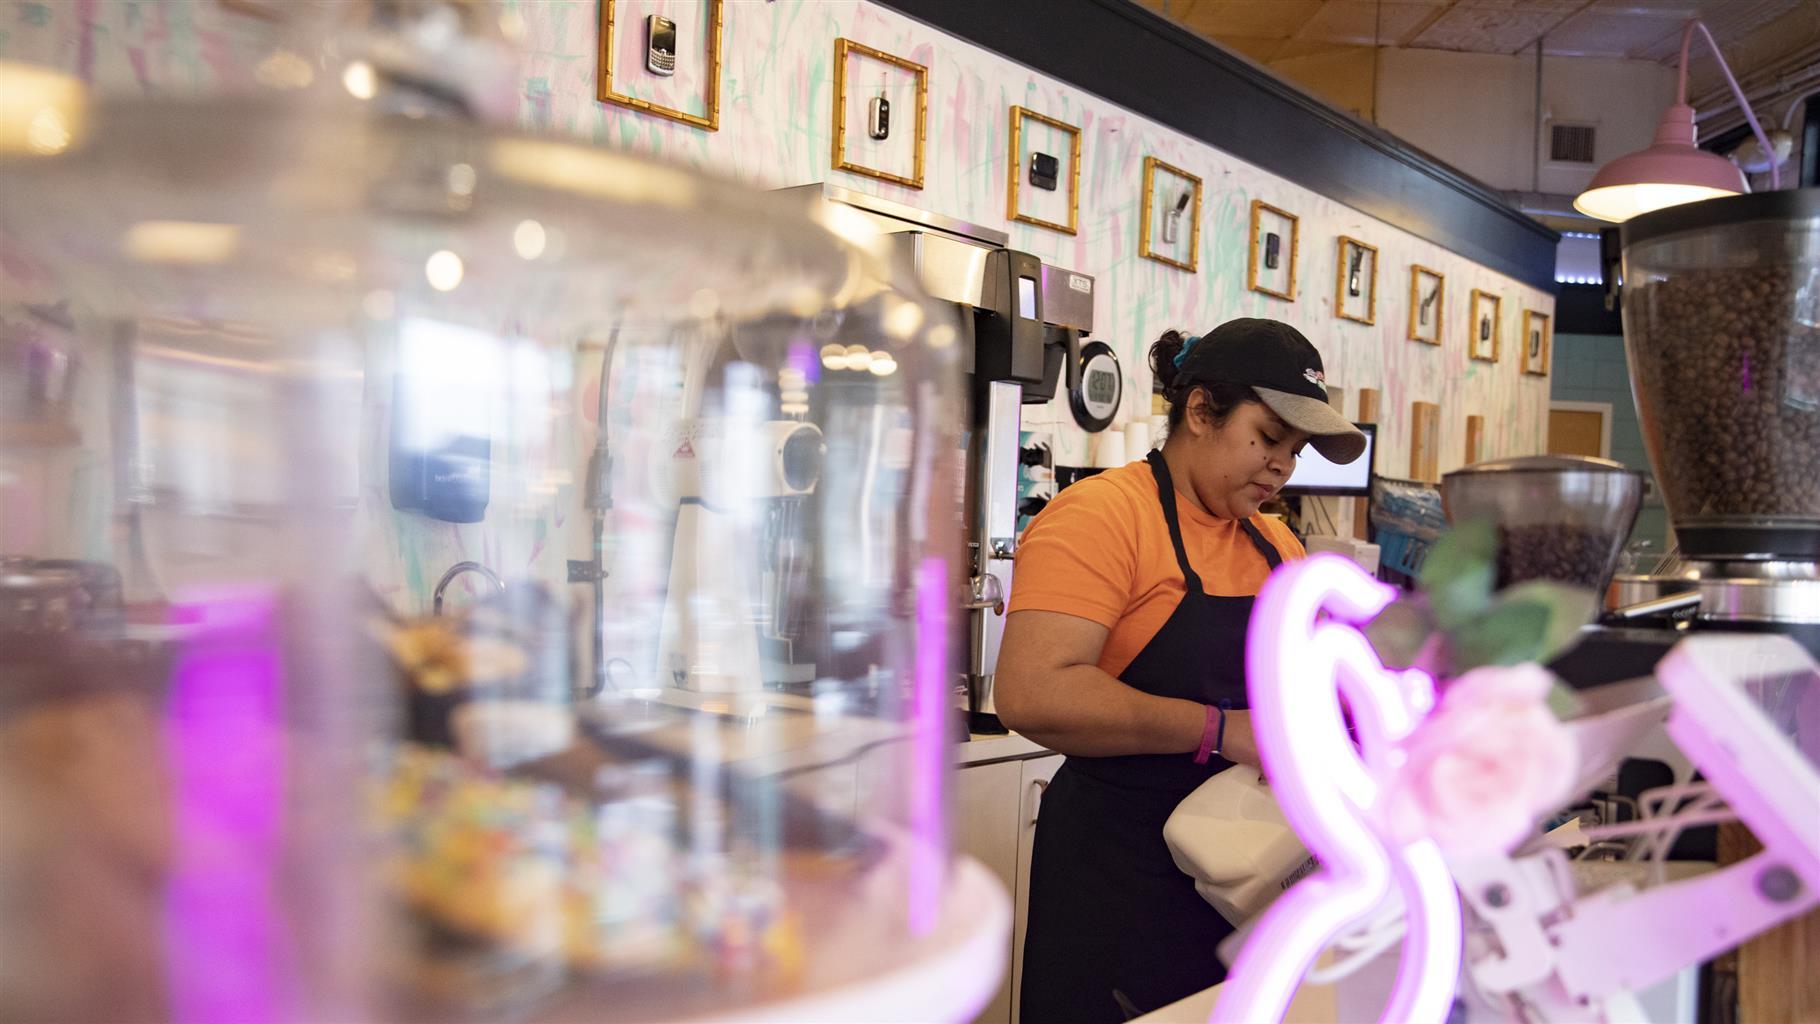 Tatiana Contreras, manager of Call Your Mother bakery in the Barracks Row community, prepares coffee on January 3, 2023 in Washington, DC. Barracks Row is a residential neighborhood filled with local business and restaurants, and is named after the oldest Marine corps in the nation.